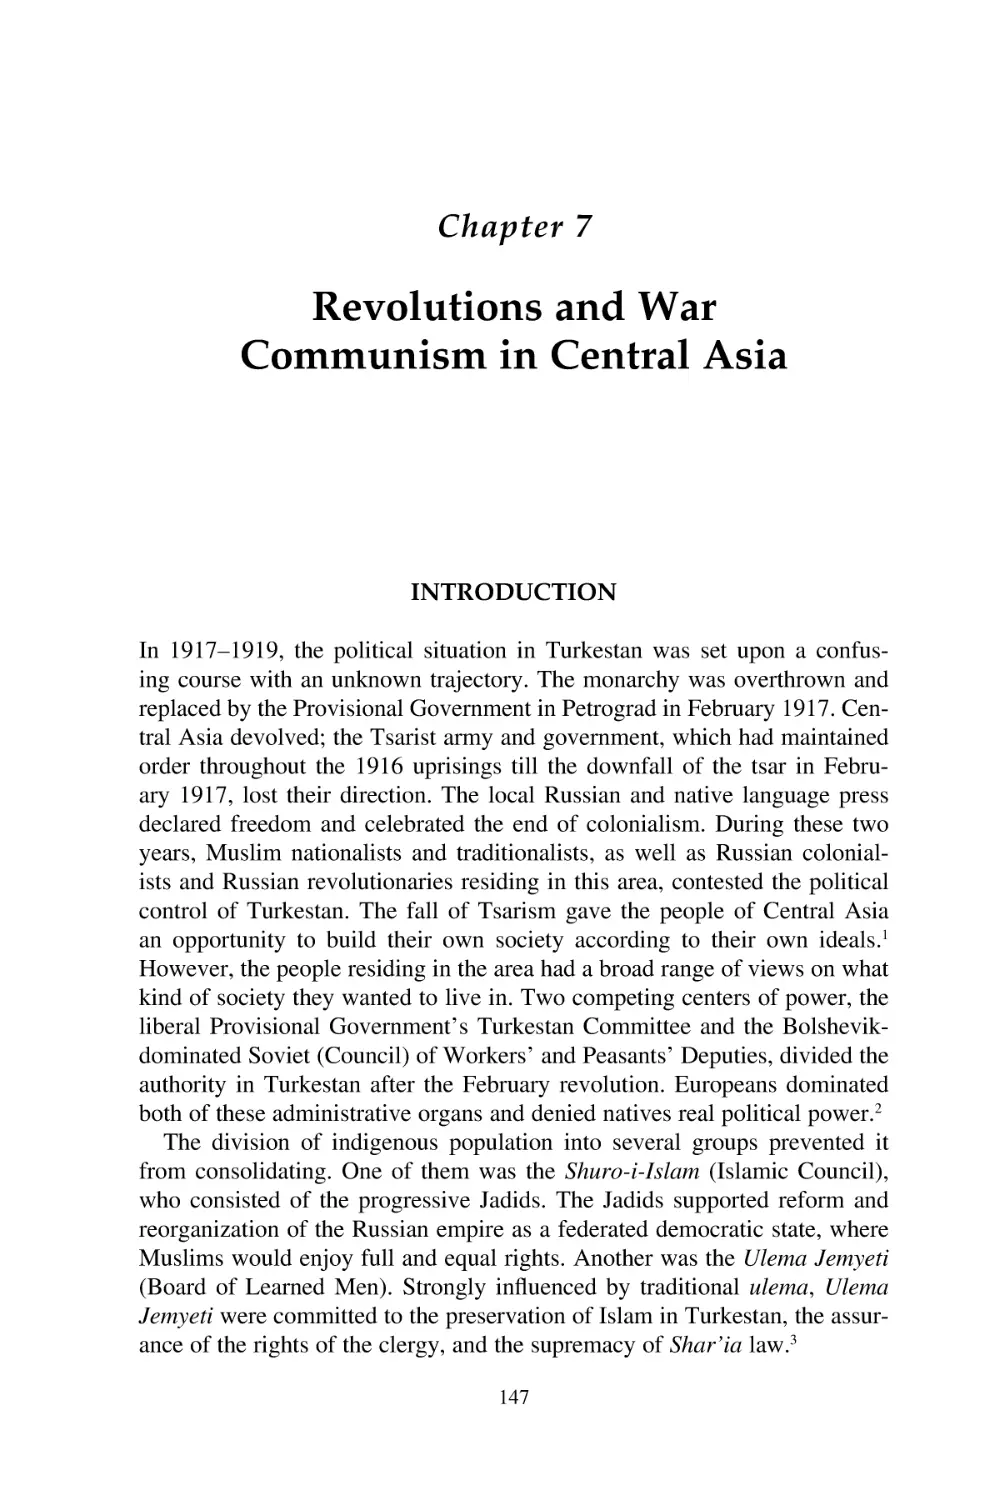 7. Revolutions and War Communism in Central Asia